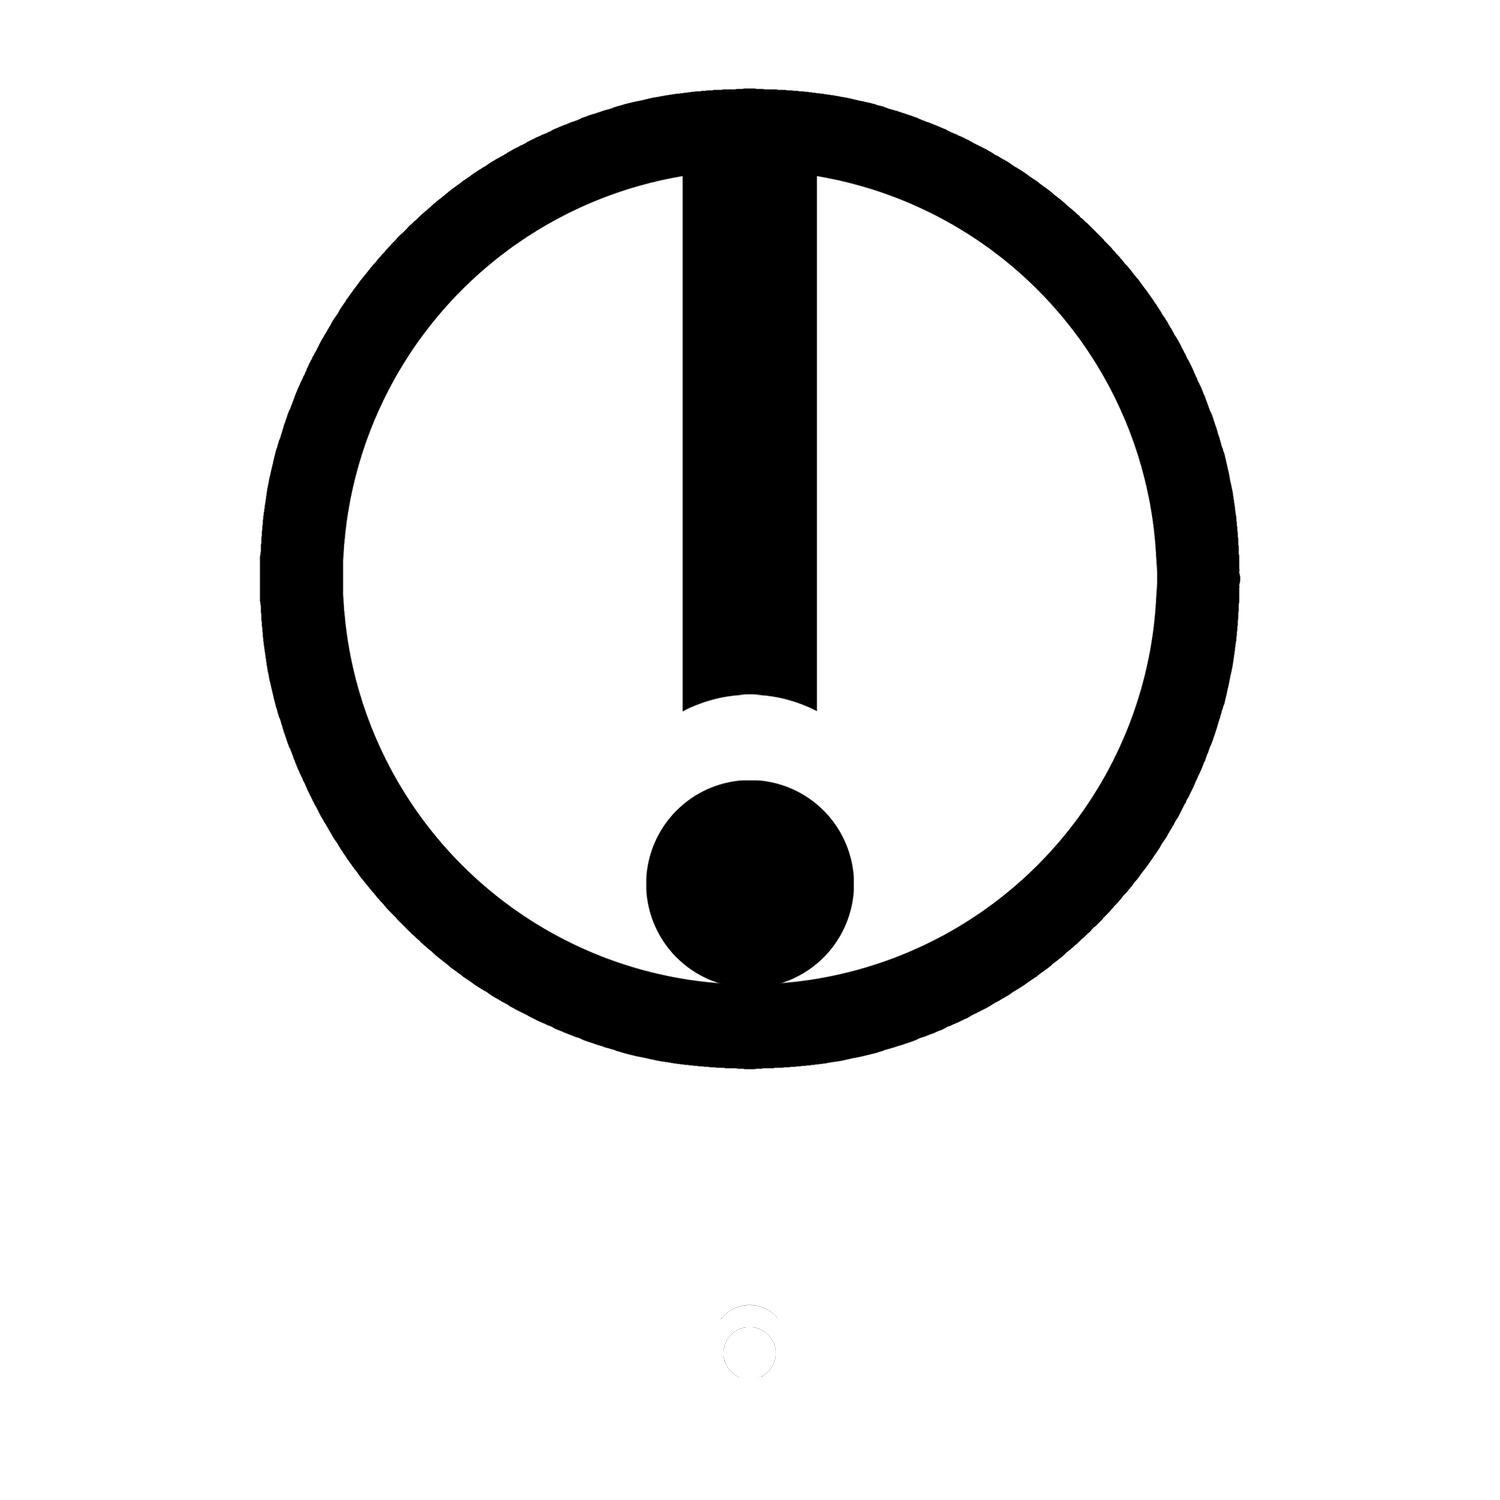 ThePointIncorporated.com